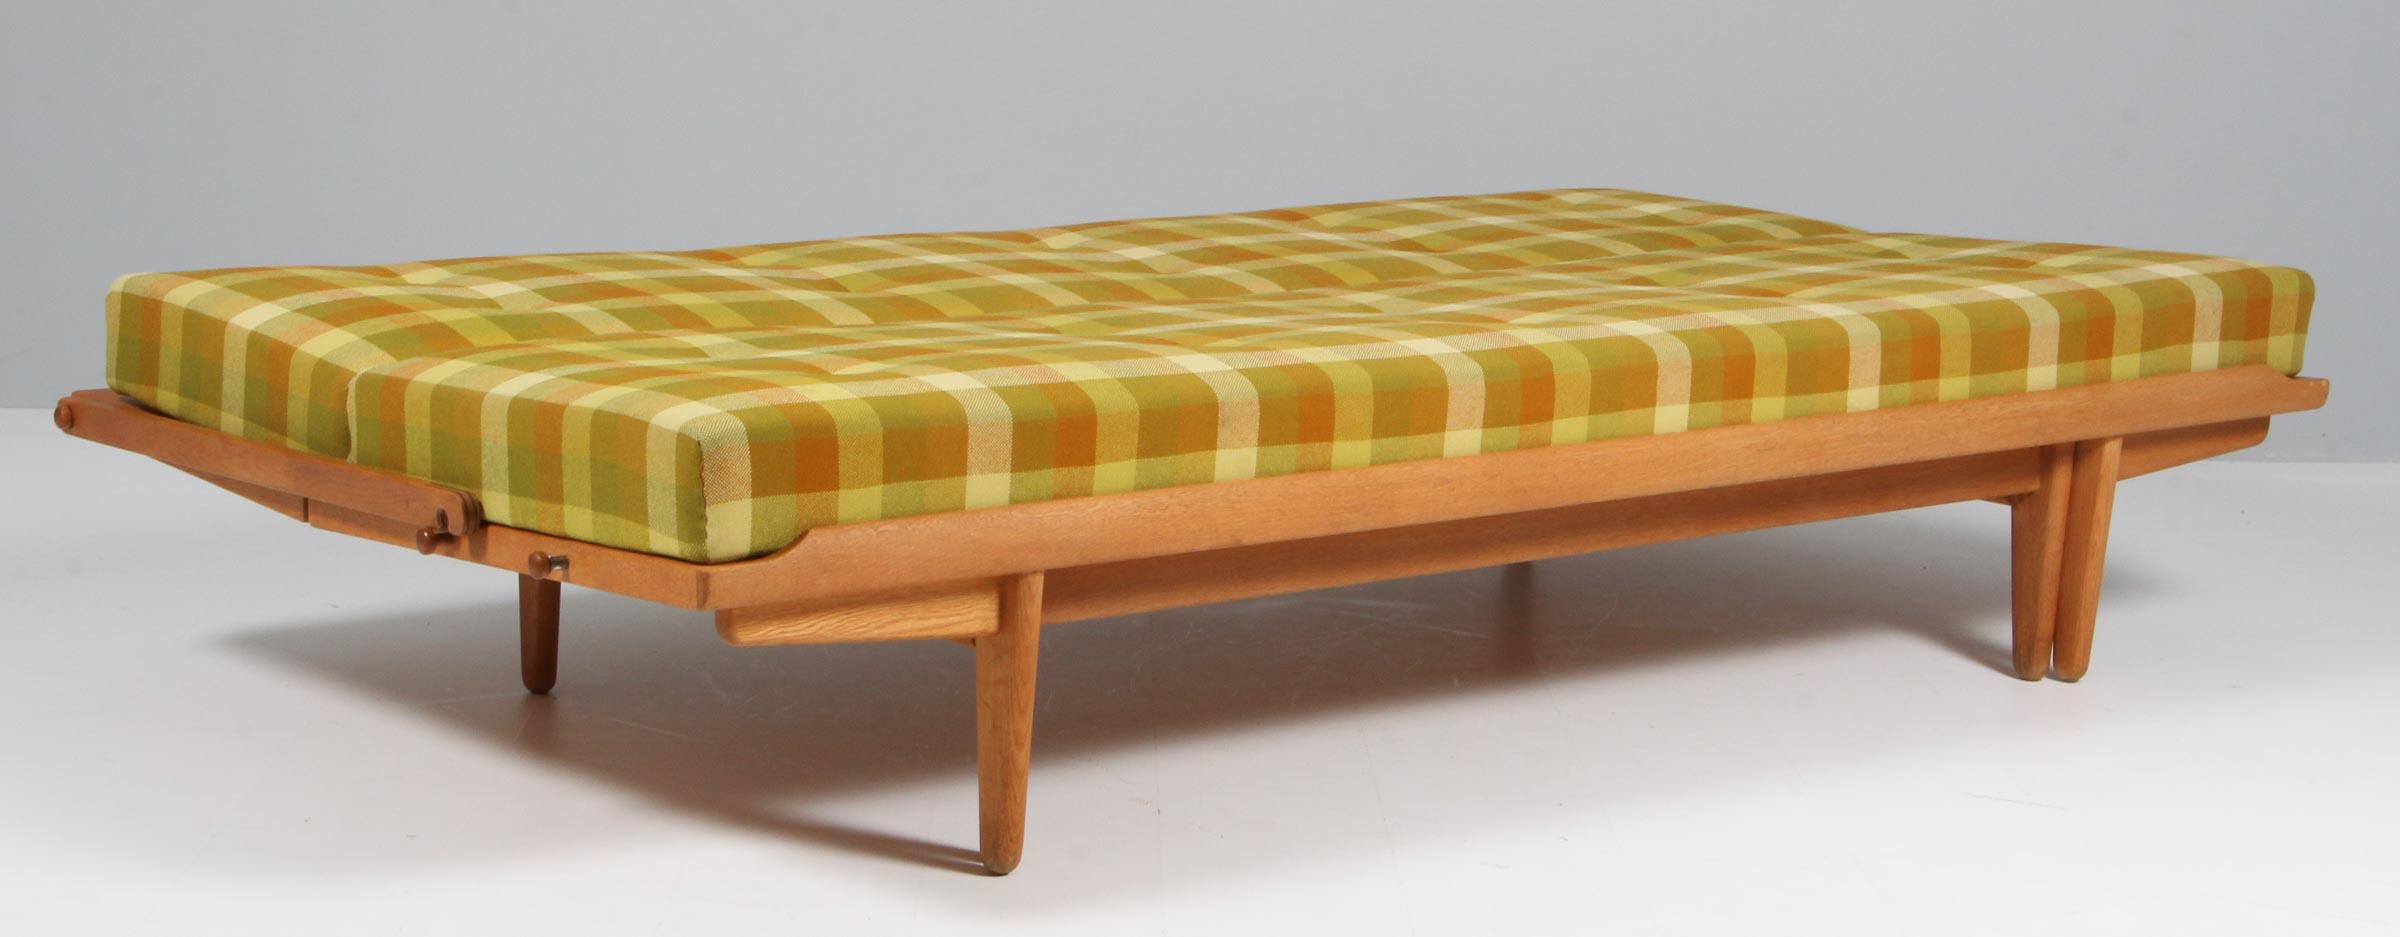 Poul Volther Diva Daybed Sofa, Denmark, 1959 3